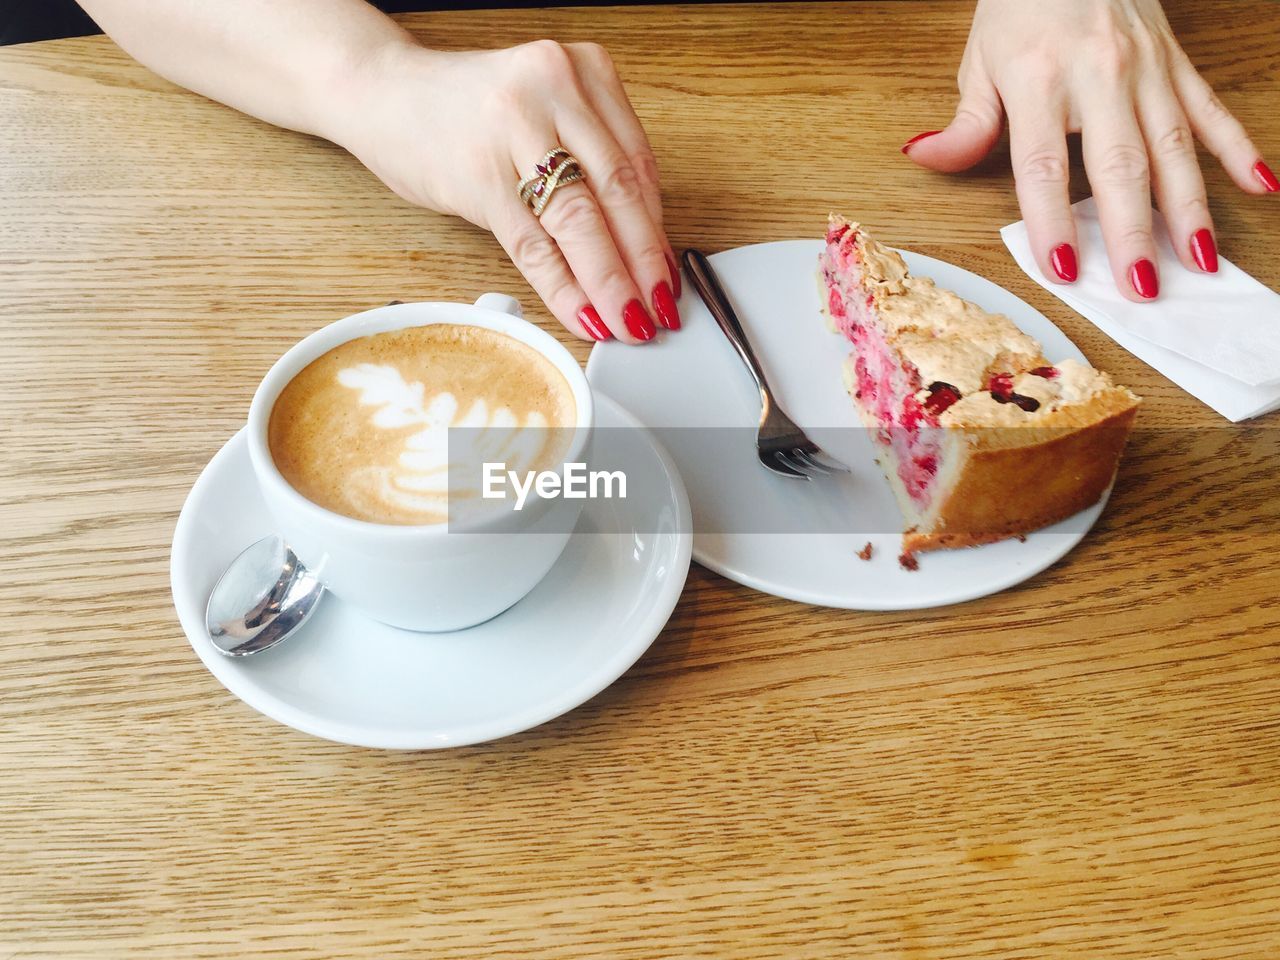 Cropped hands of woman with cake and coffee at wooden table